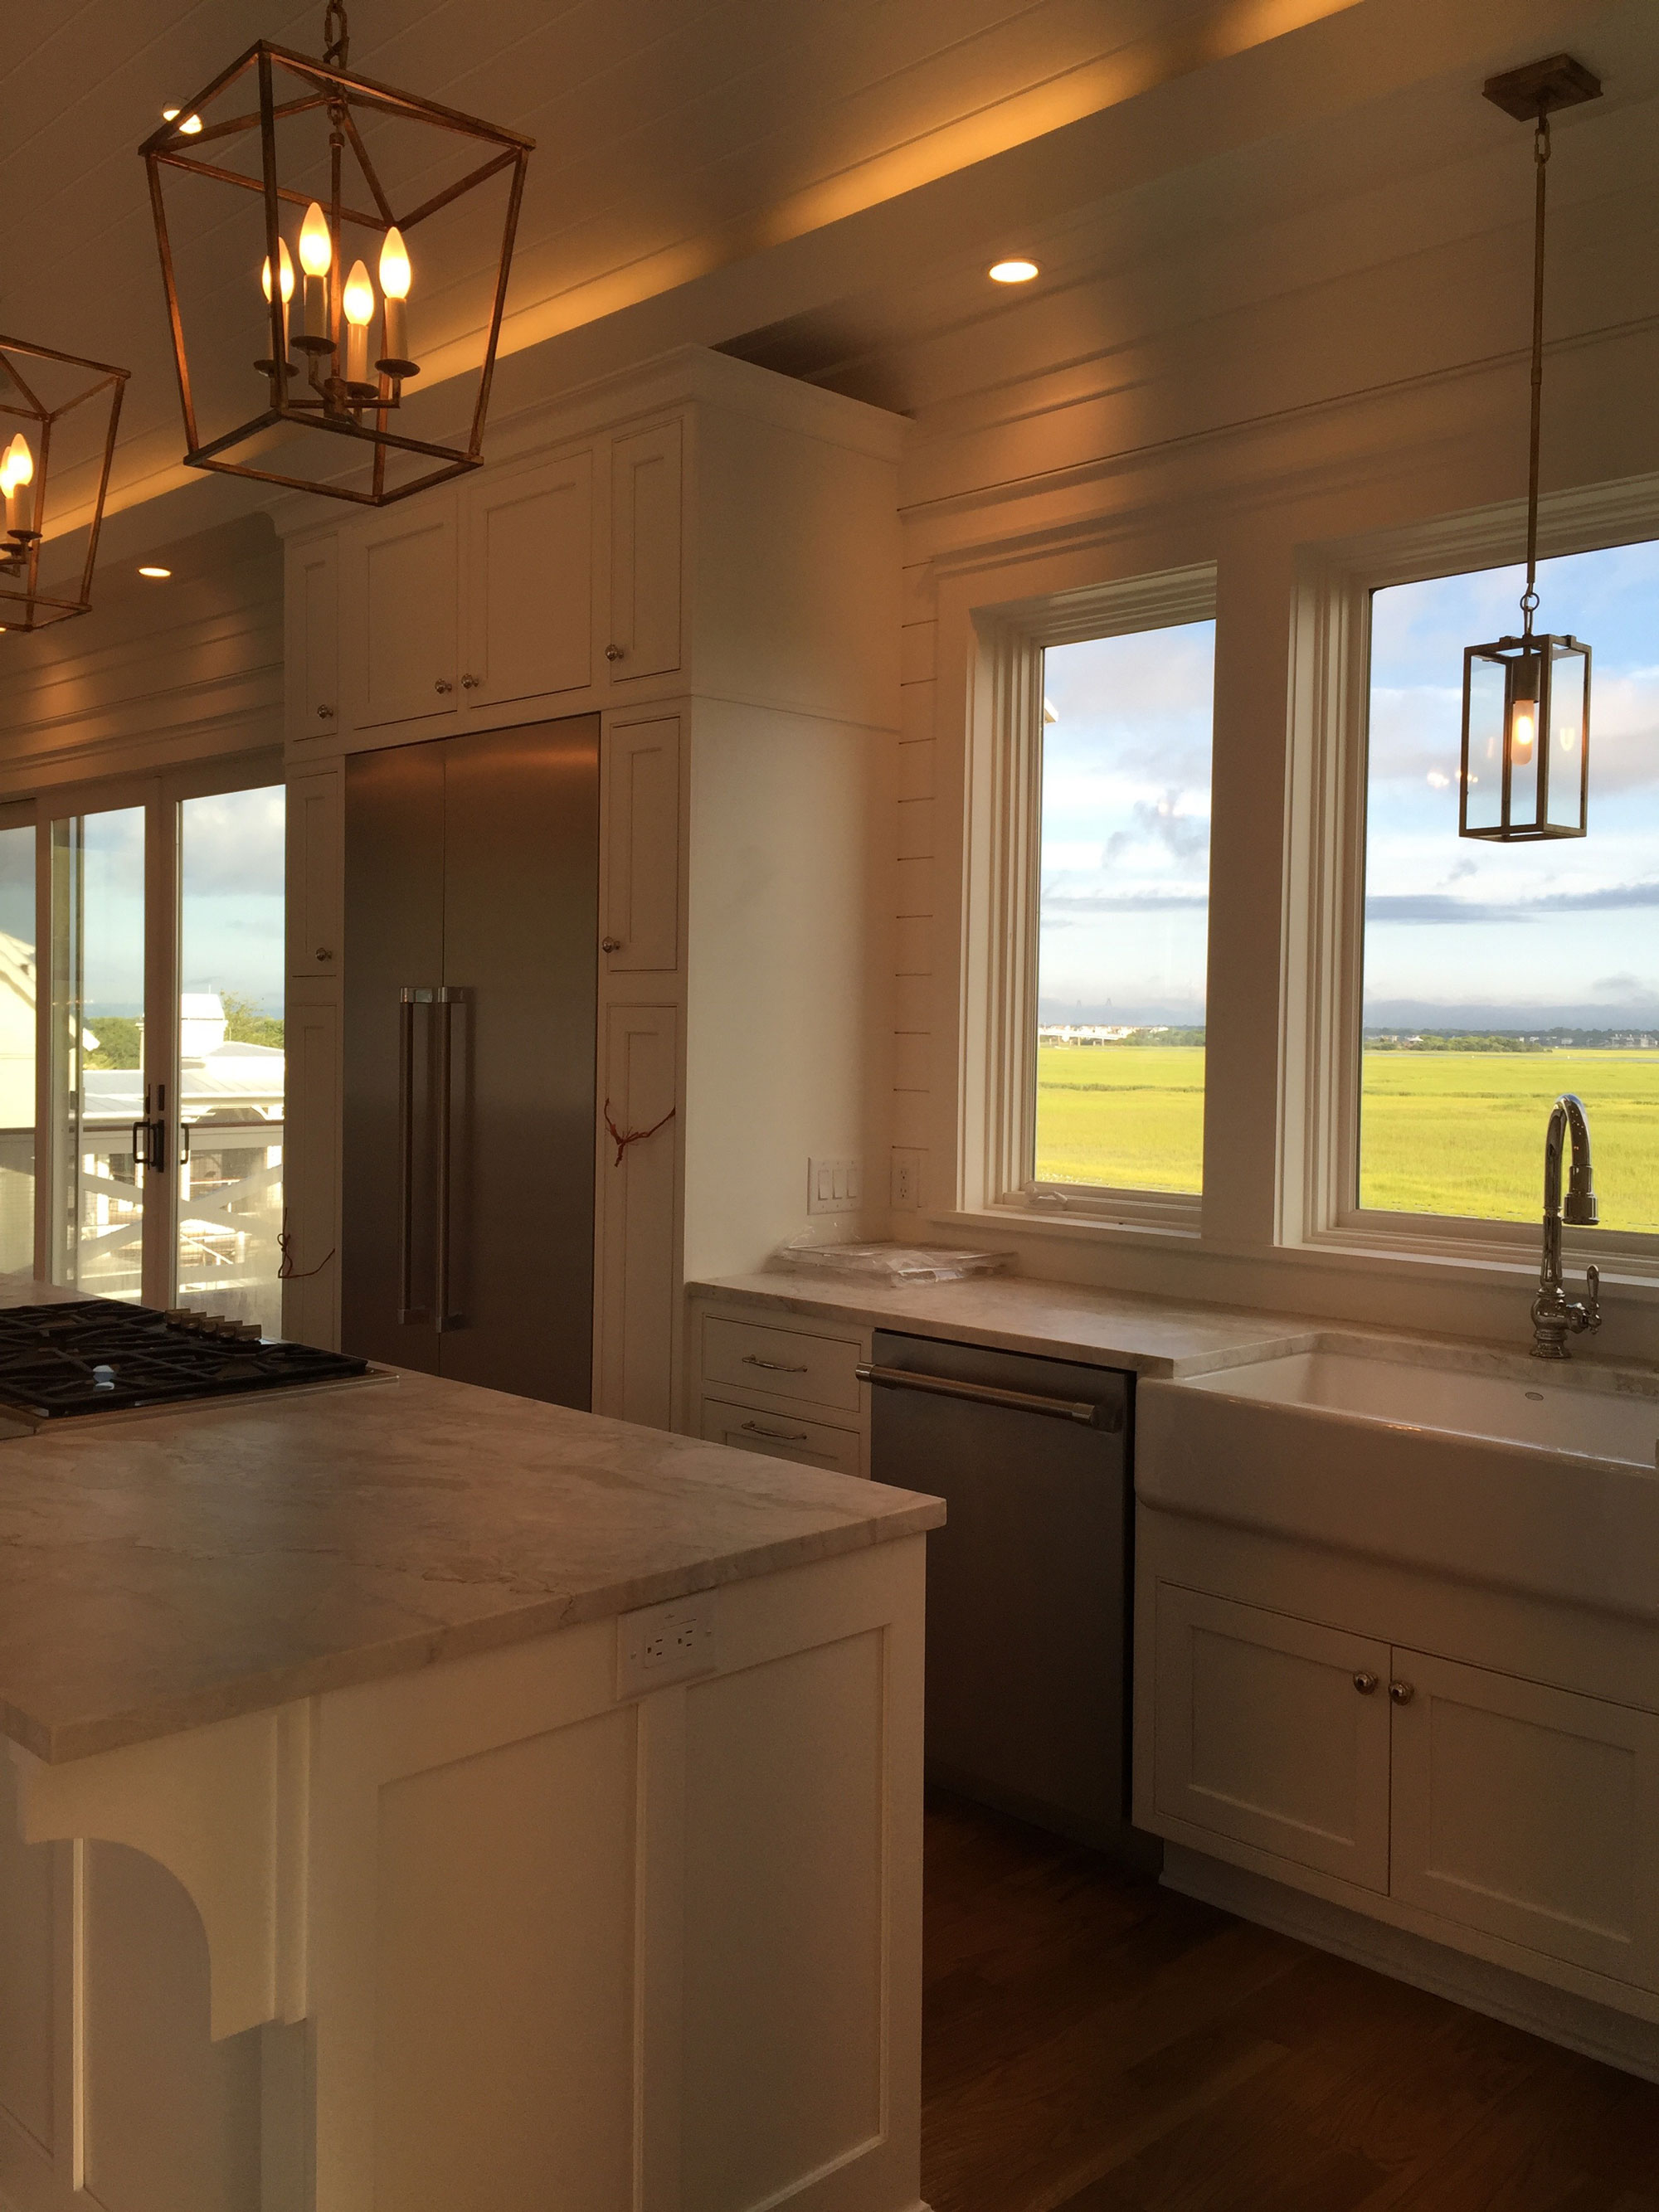 Kitchen with wall of windows to marsh view